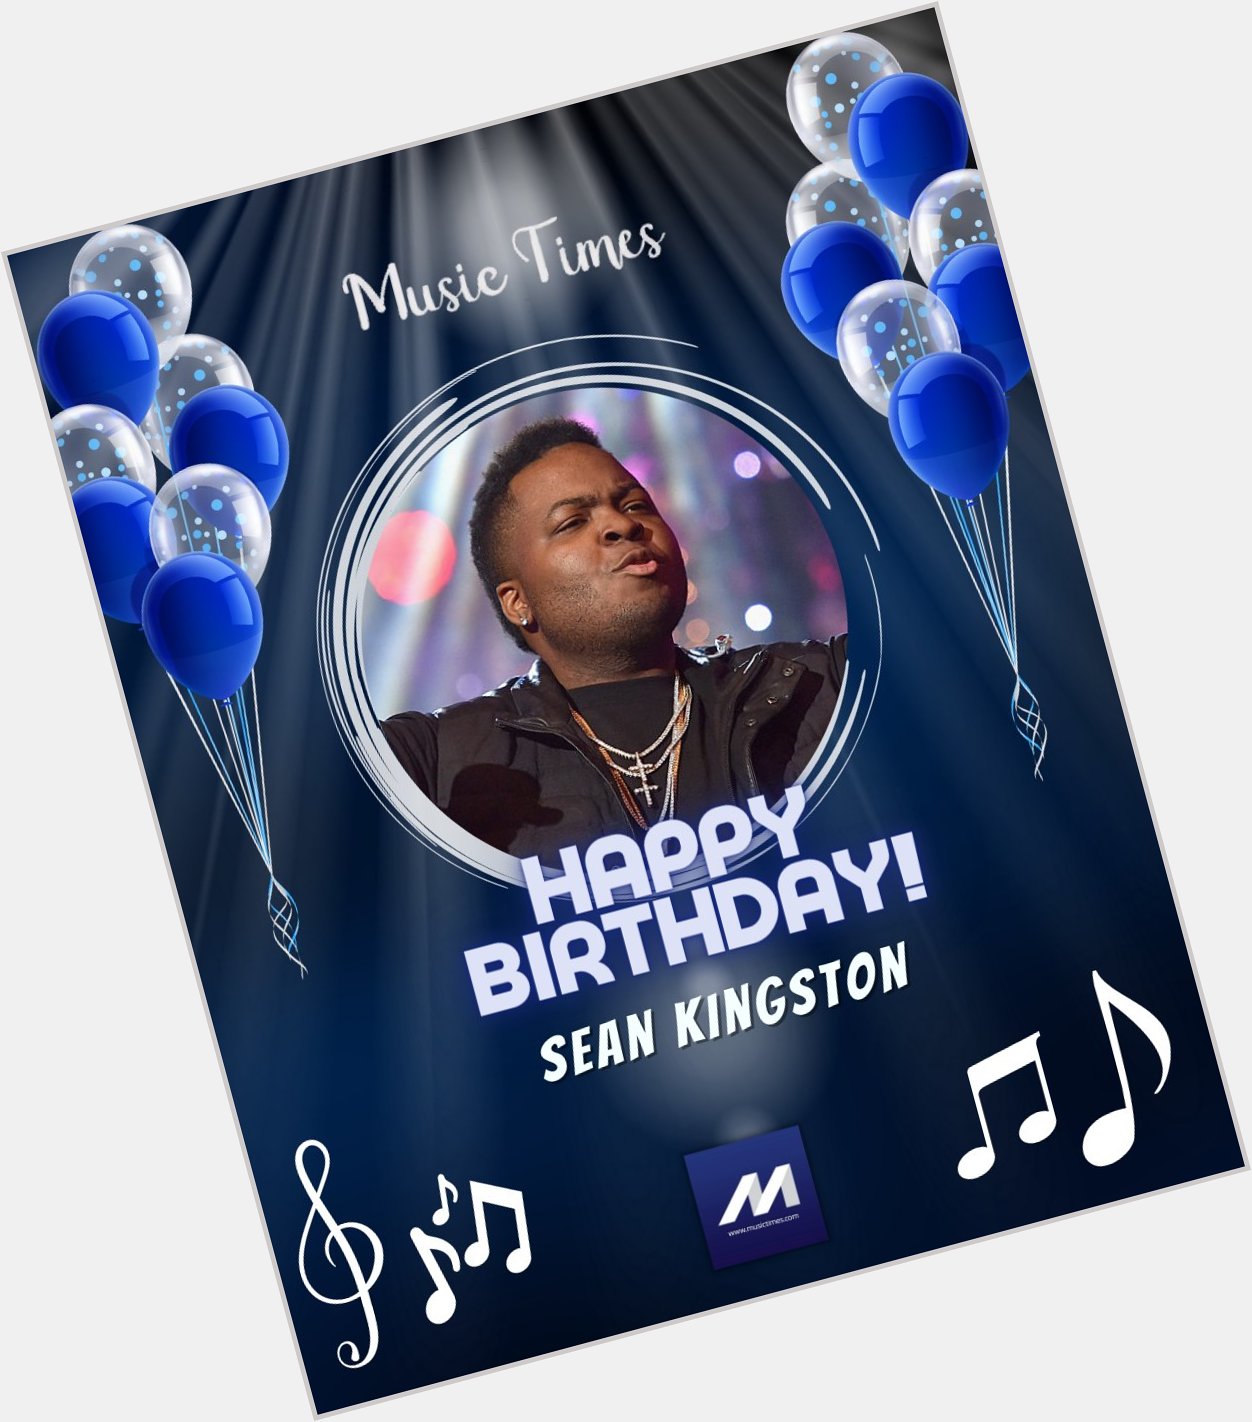 Happy birthday Sean Kingston! We wish your finances will be in order from now on!  